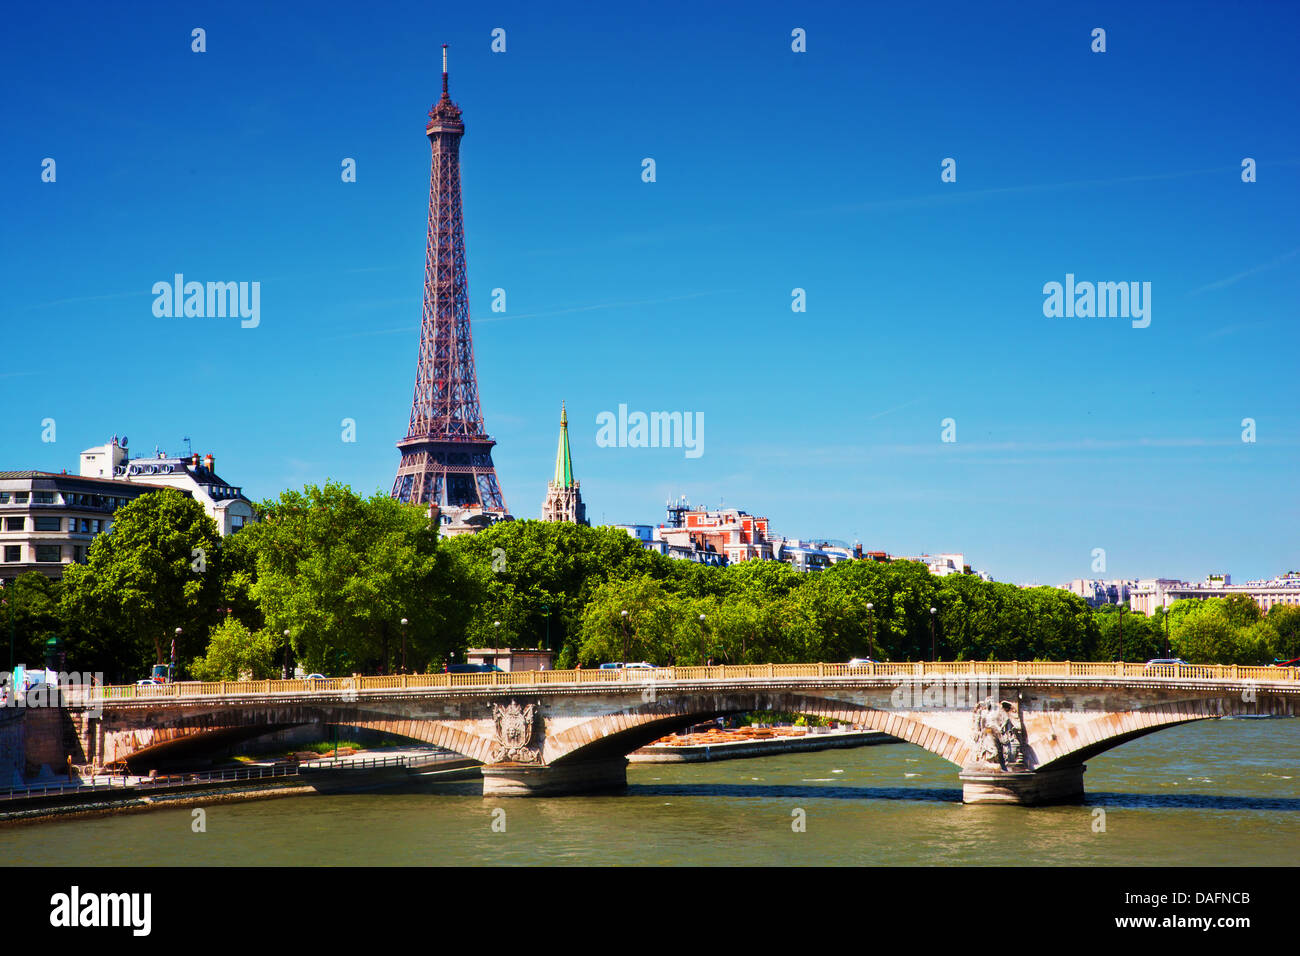 Eiffel Tower and Pont Des invalides bridge on Seine river in Paris, France on a sunny day Stock Photo